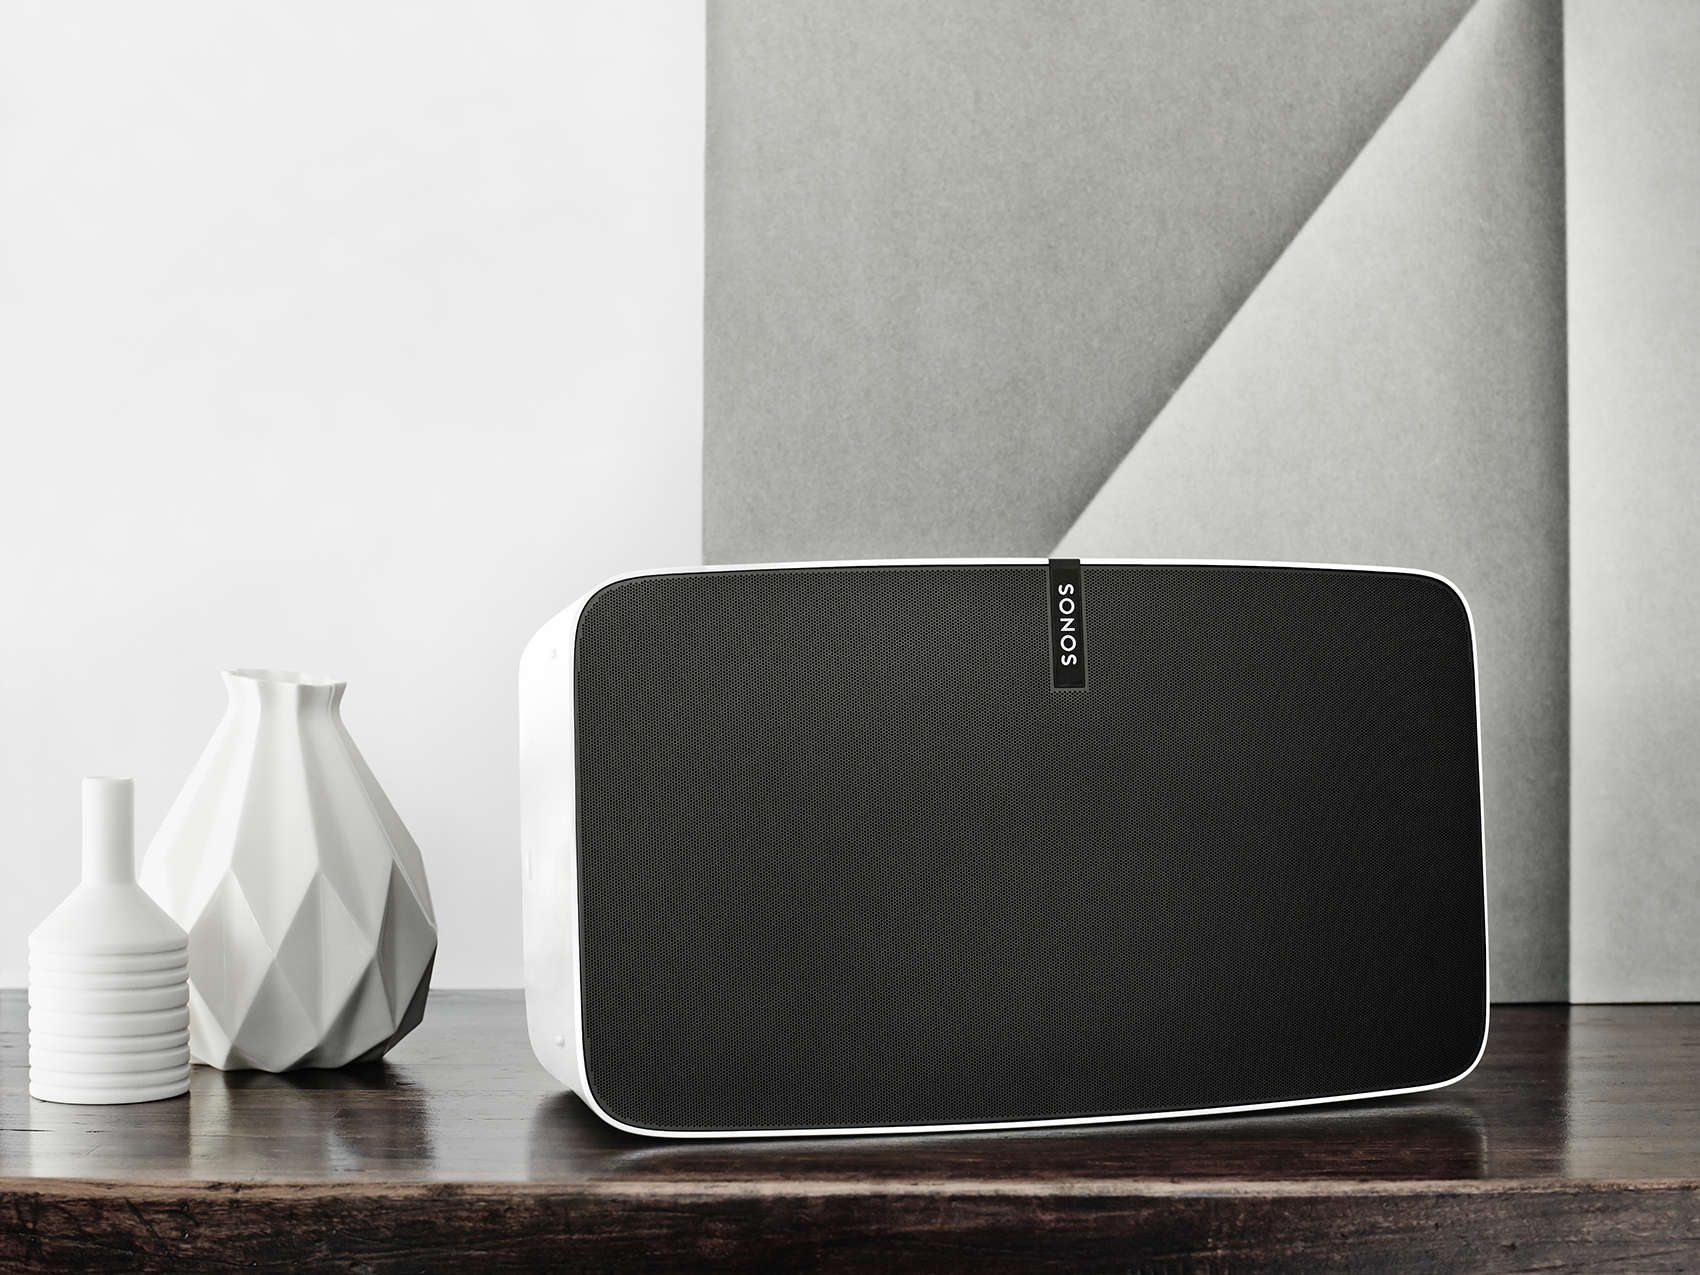 The SONOS PLAY: 5 smart speaker analyzes the acoustics of a room and adjusts the sounds.